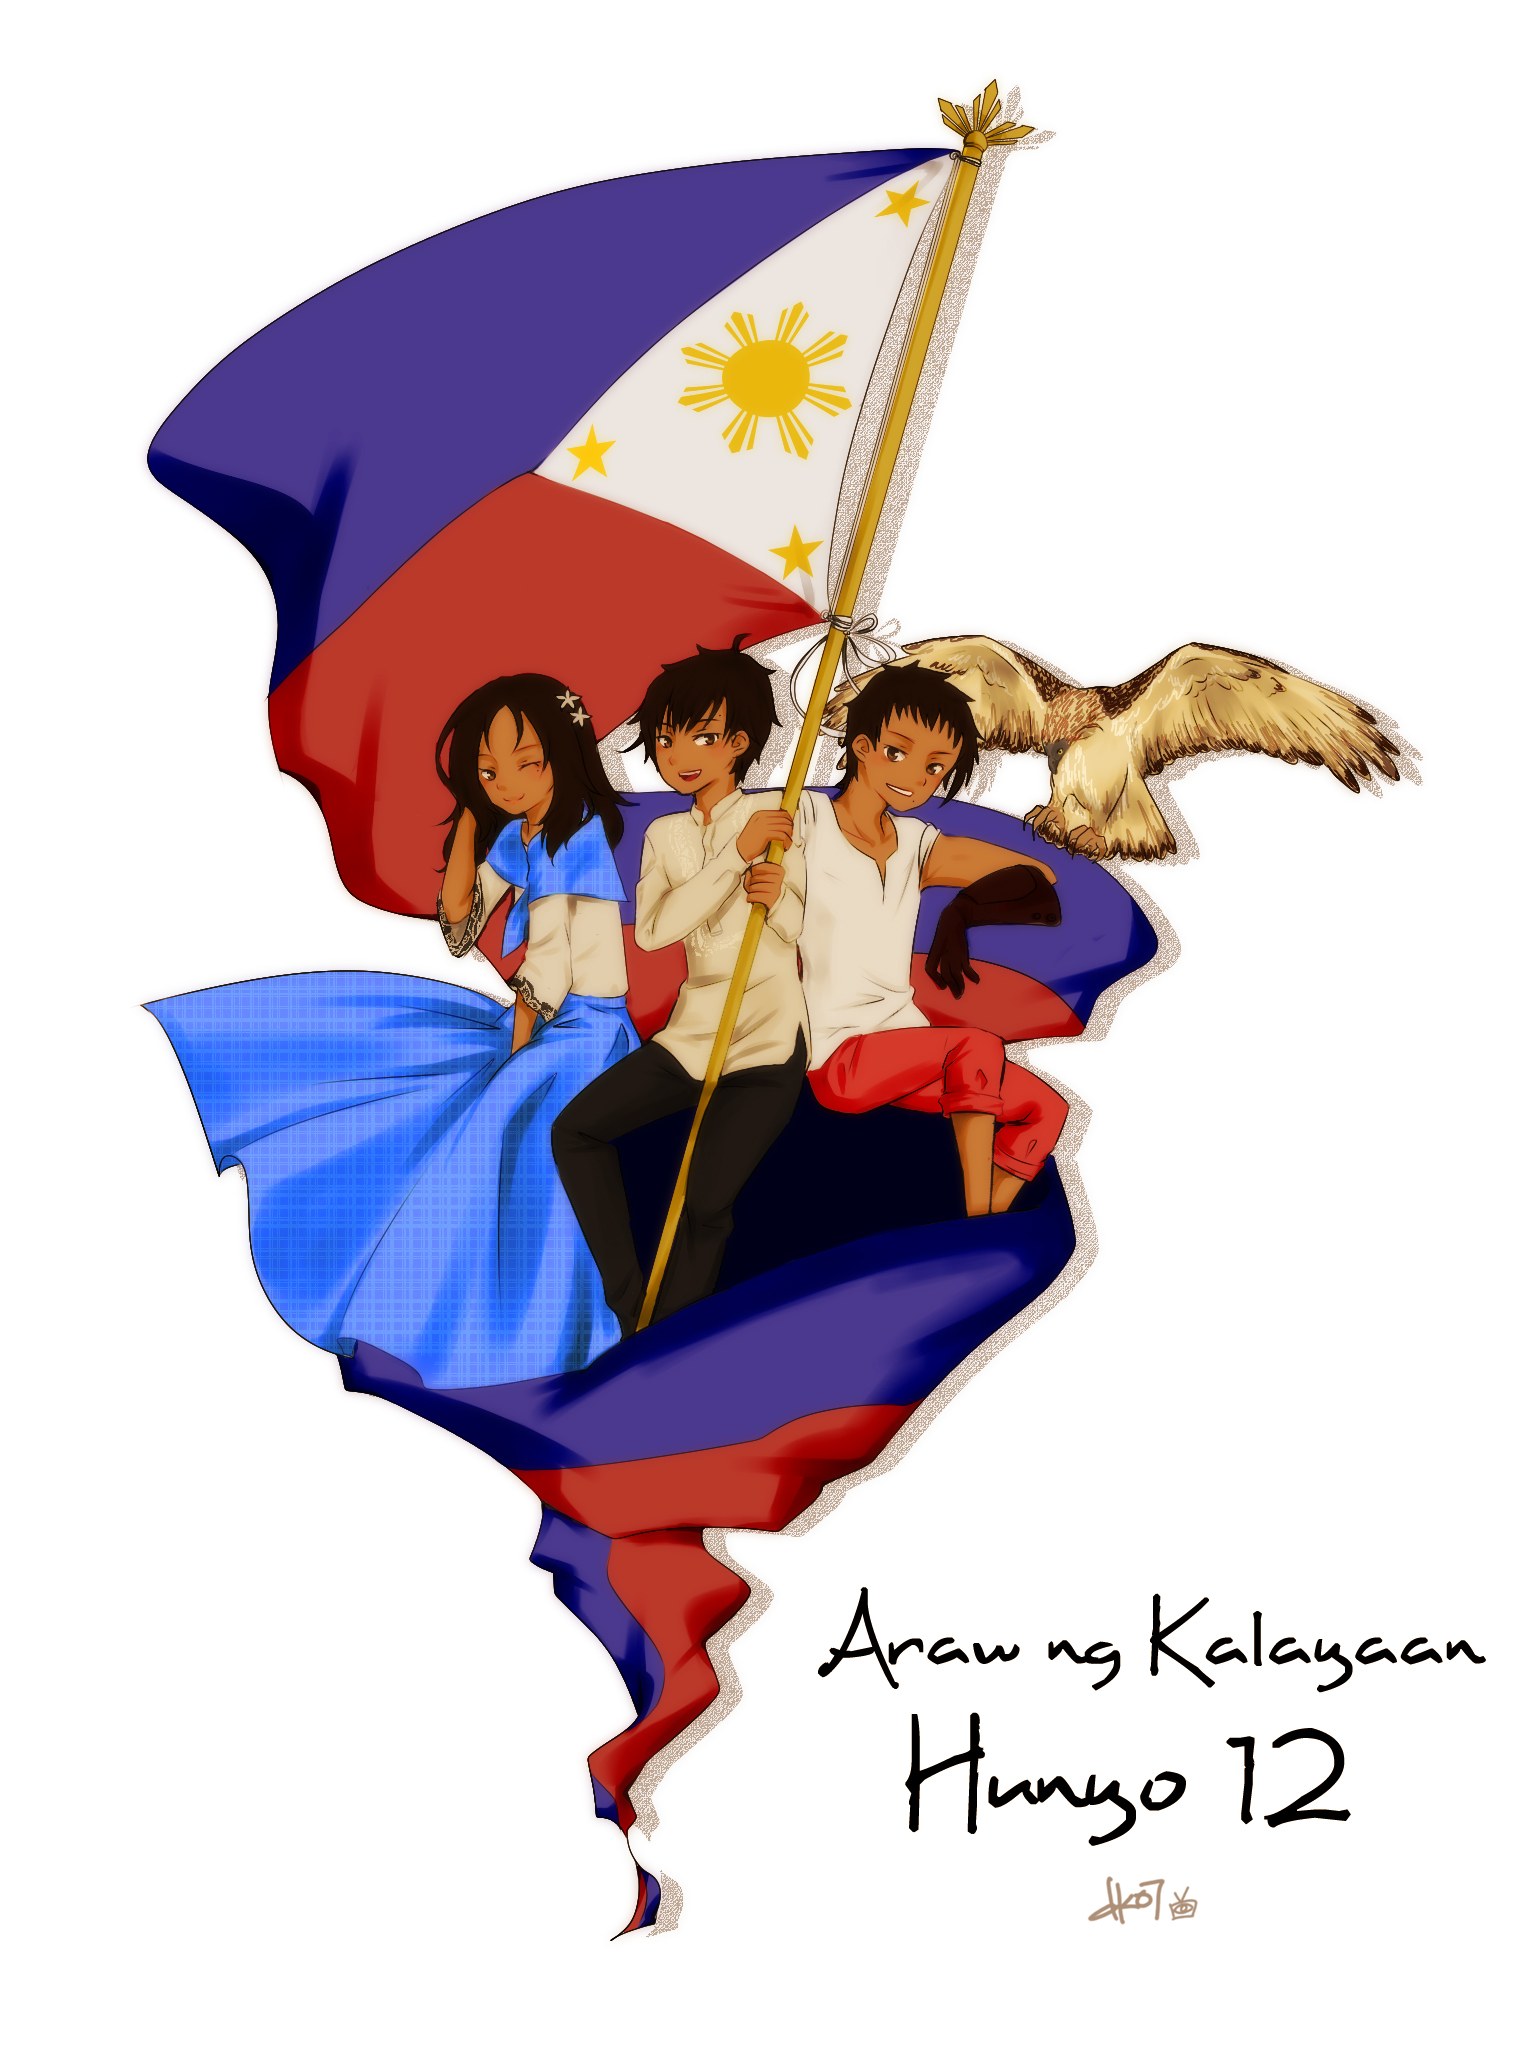 Philippine Independence Day Easy Kalayaan Poster Drawing Vector Stock